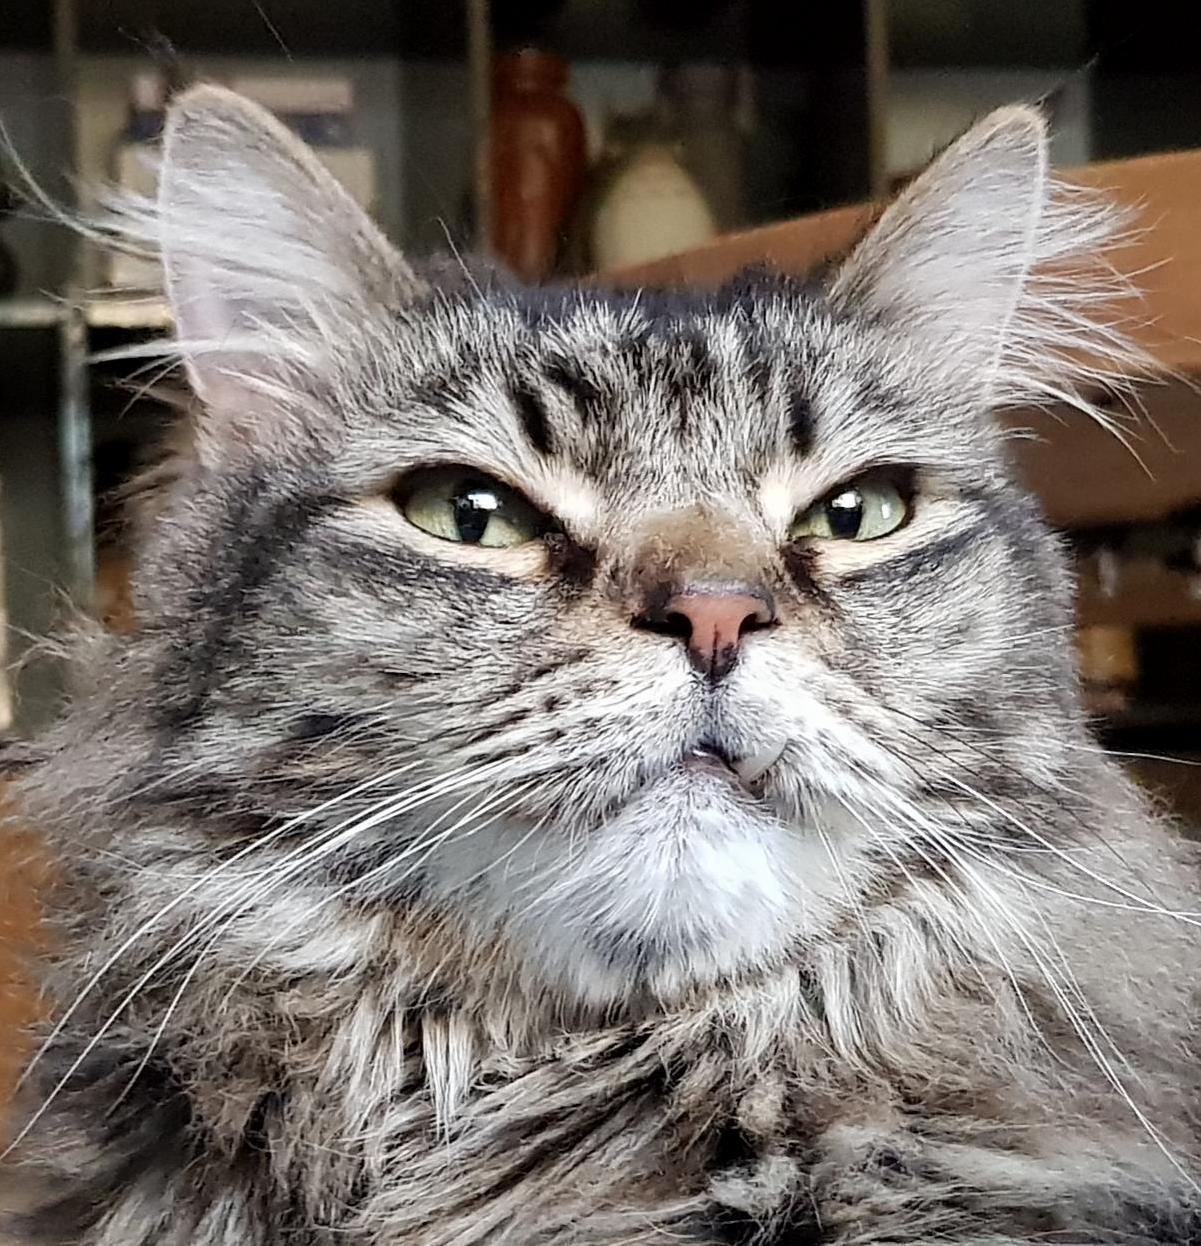 We just adopted elvis from a shelter where he lived for a long time. hes eight, has amazing floofs and a snaggletooth. cant believe he was overlooked.